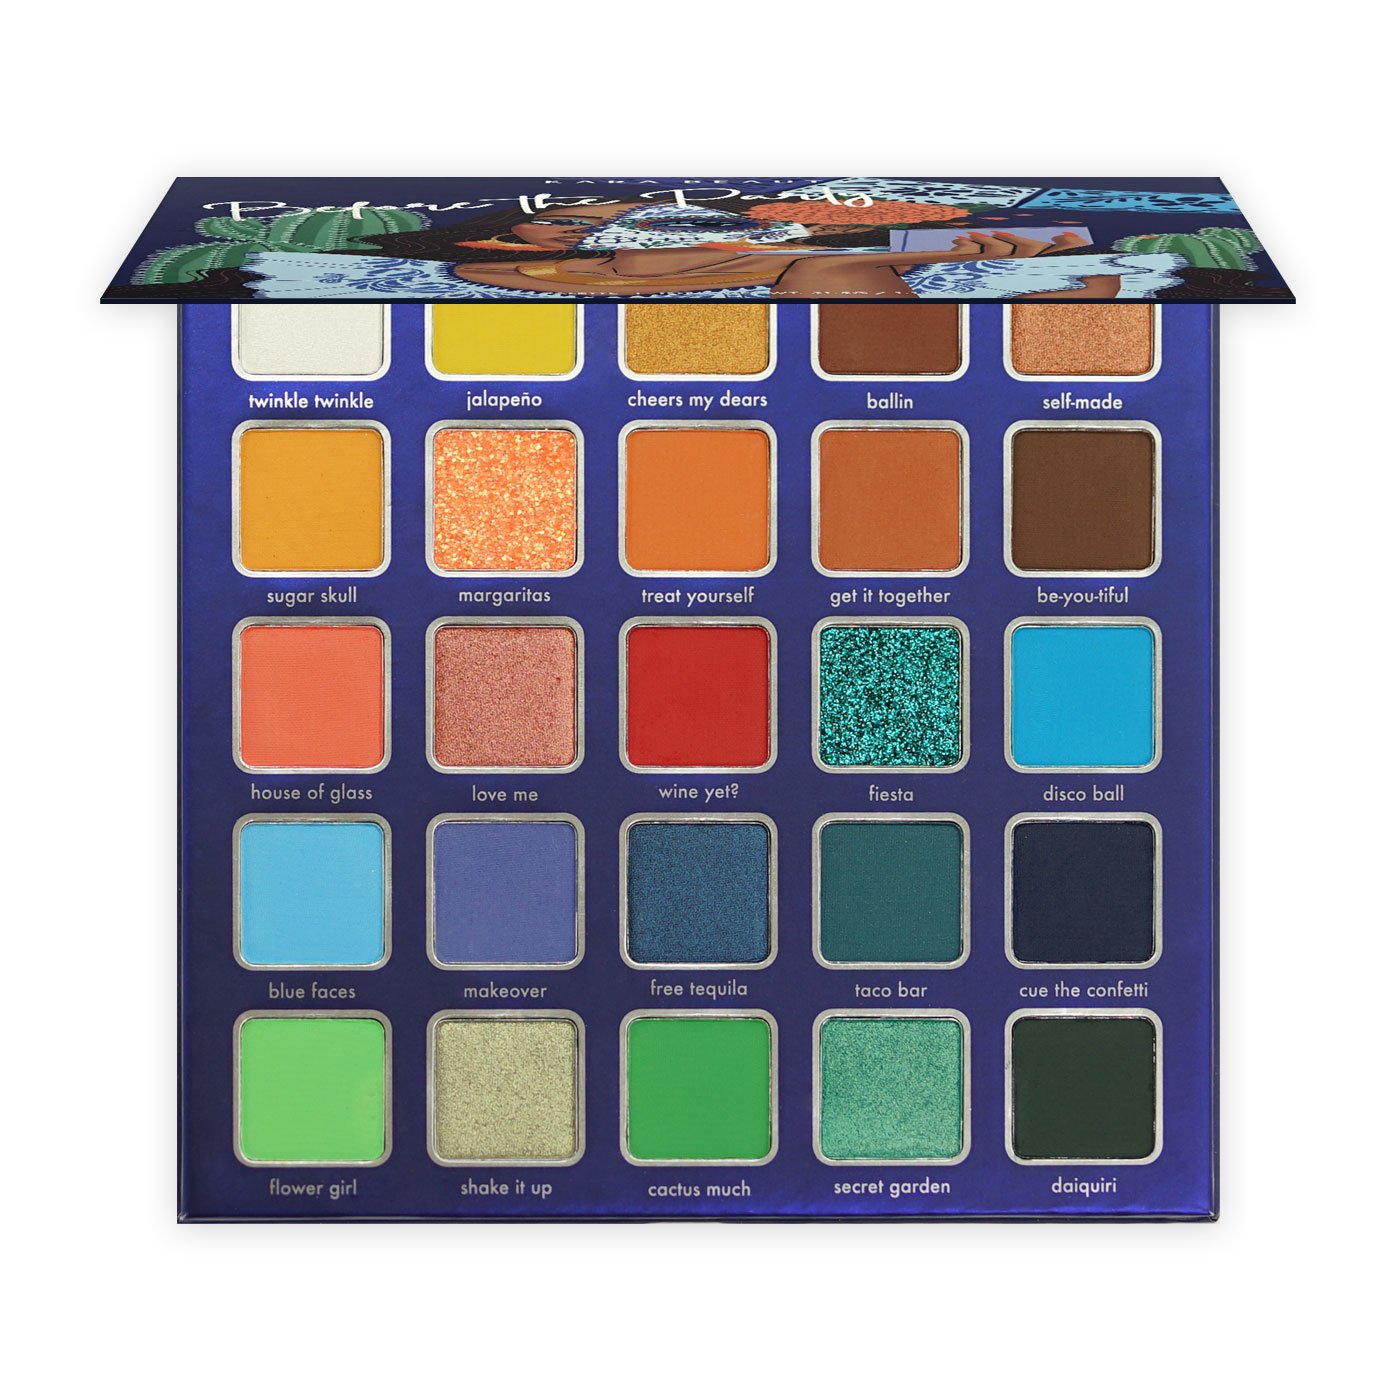 Kara Beauty's Before the Party - Day of the Dead inspired 30-Shade Vegan eyeshadow palette